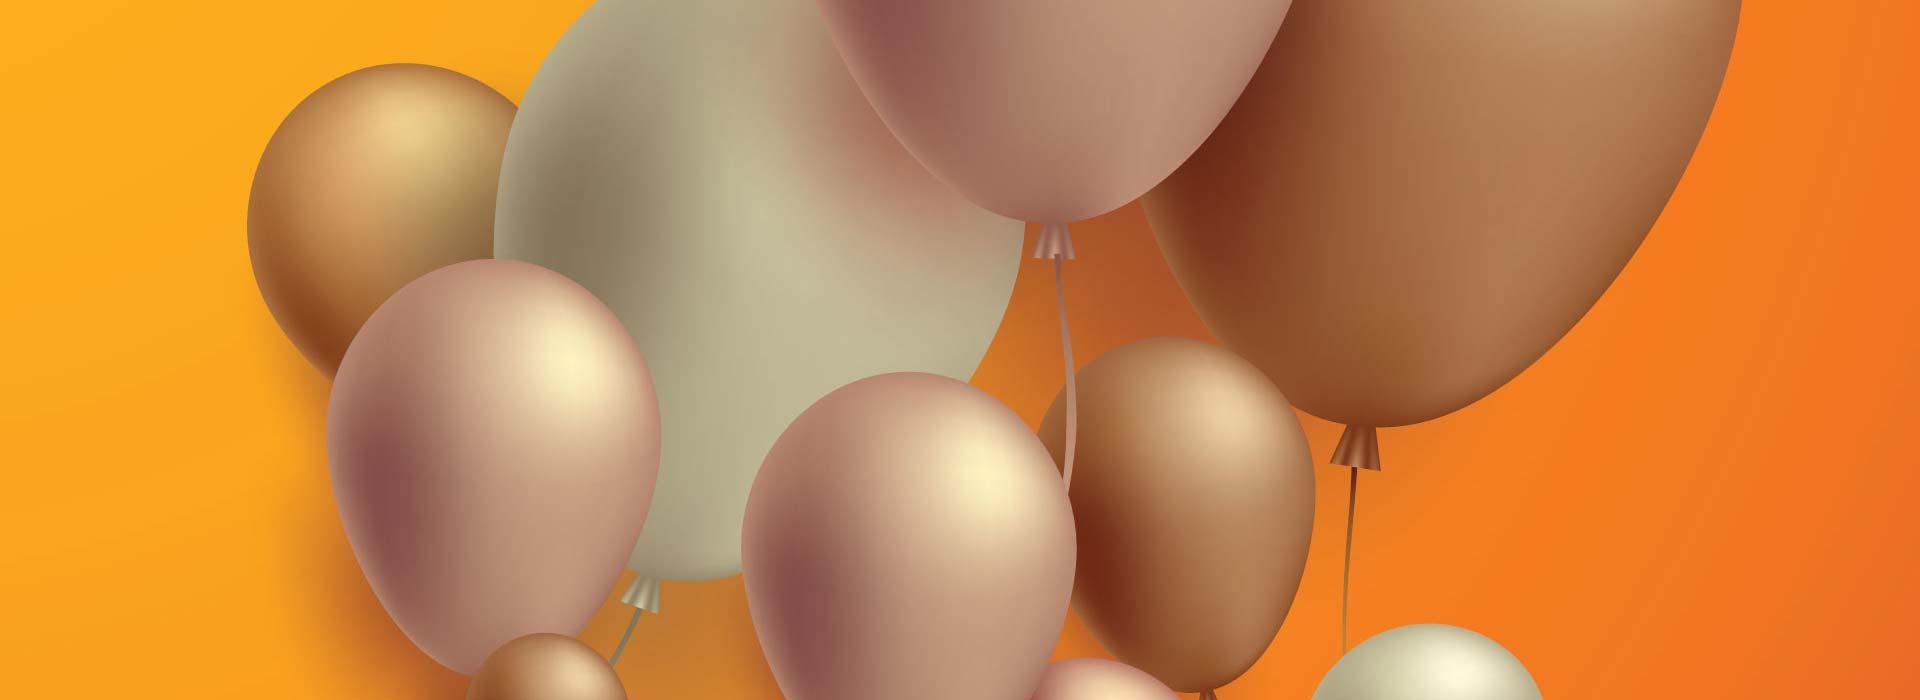 Orange background with pink, copper and ivory balloons